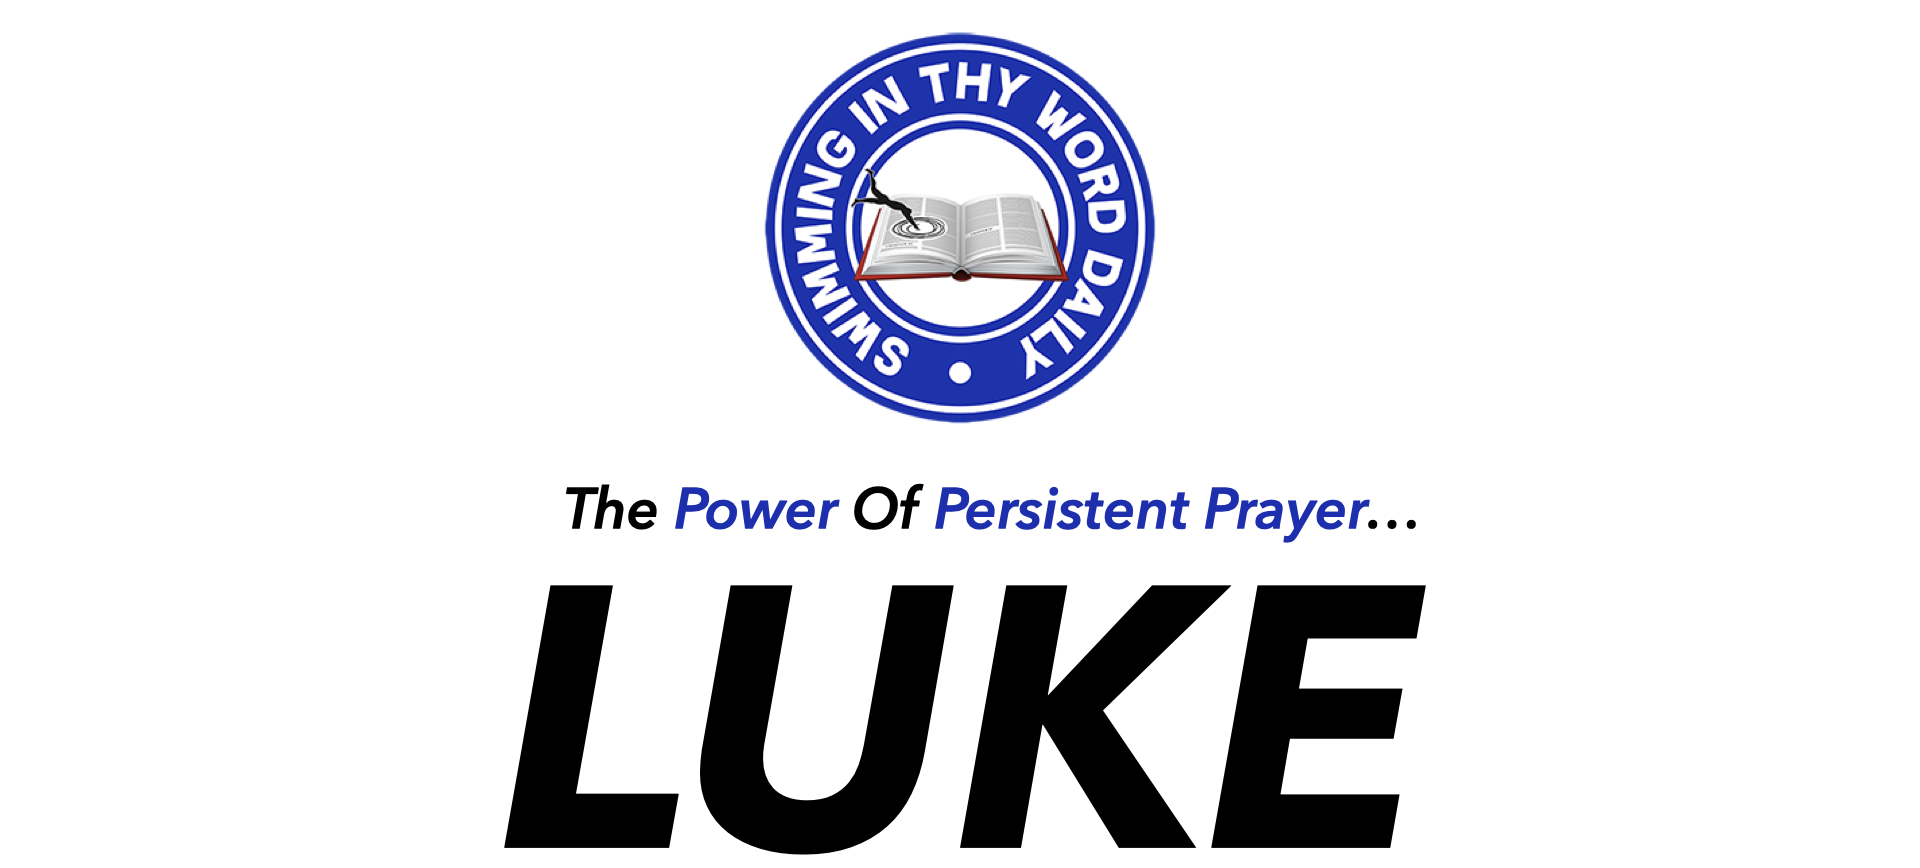 The power of Persistent Prayer